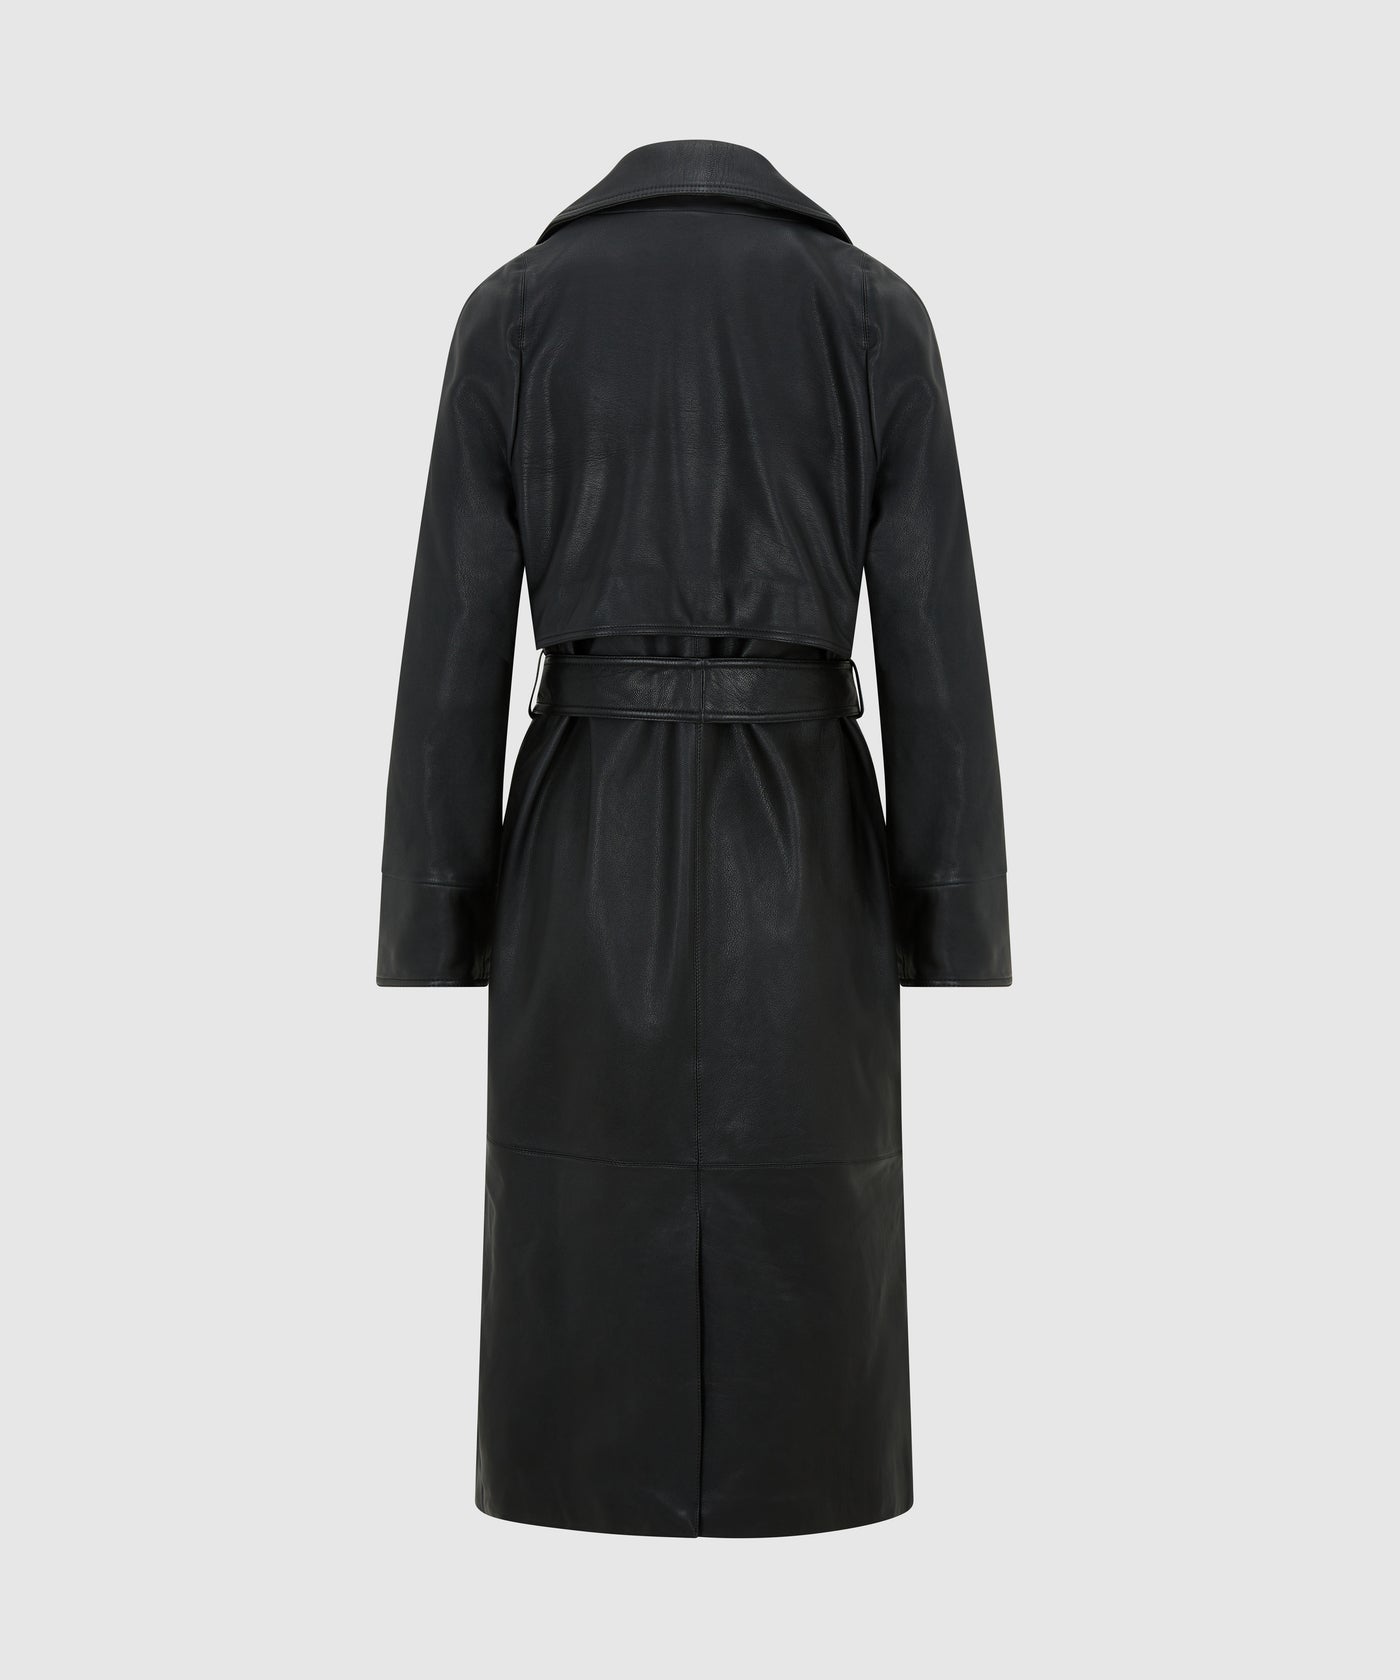 Double-Breasted Premium 100% Leather Trench Coat With Waist Belt